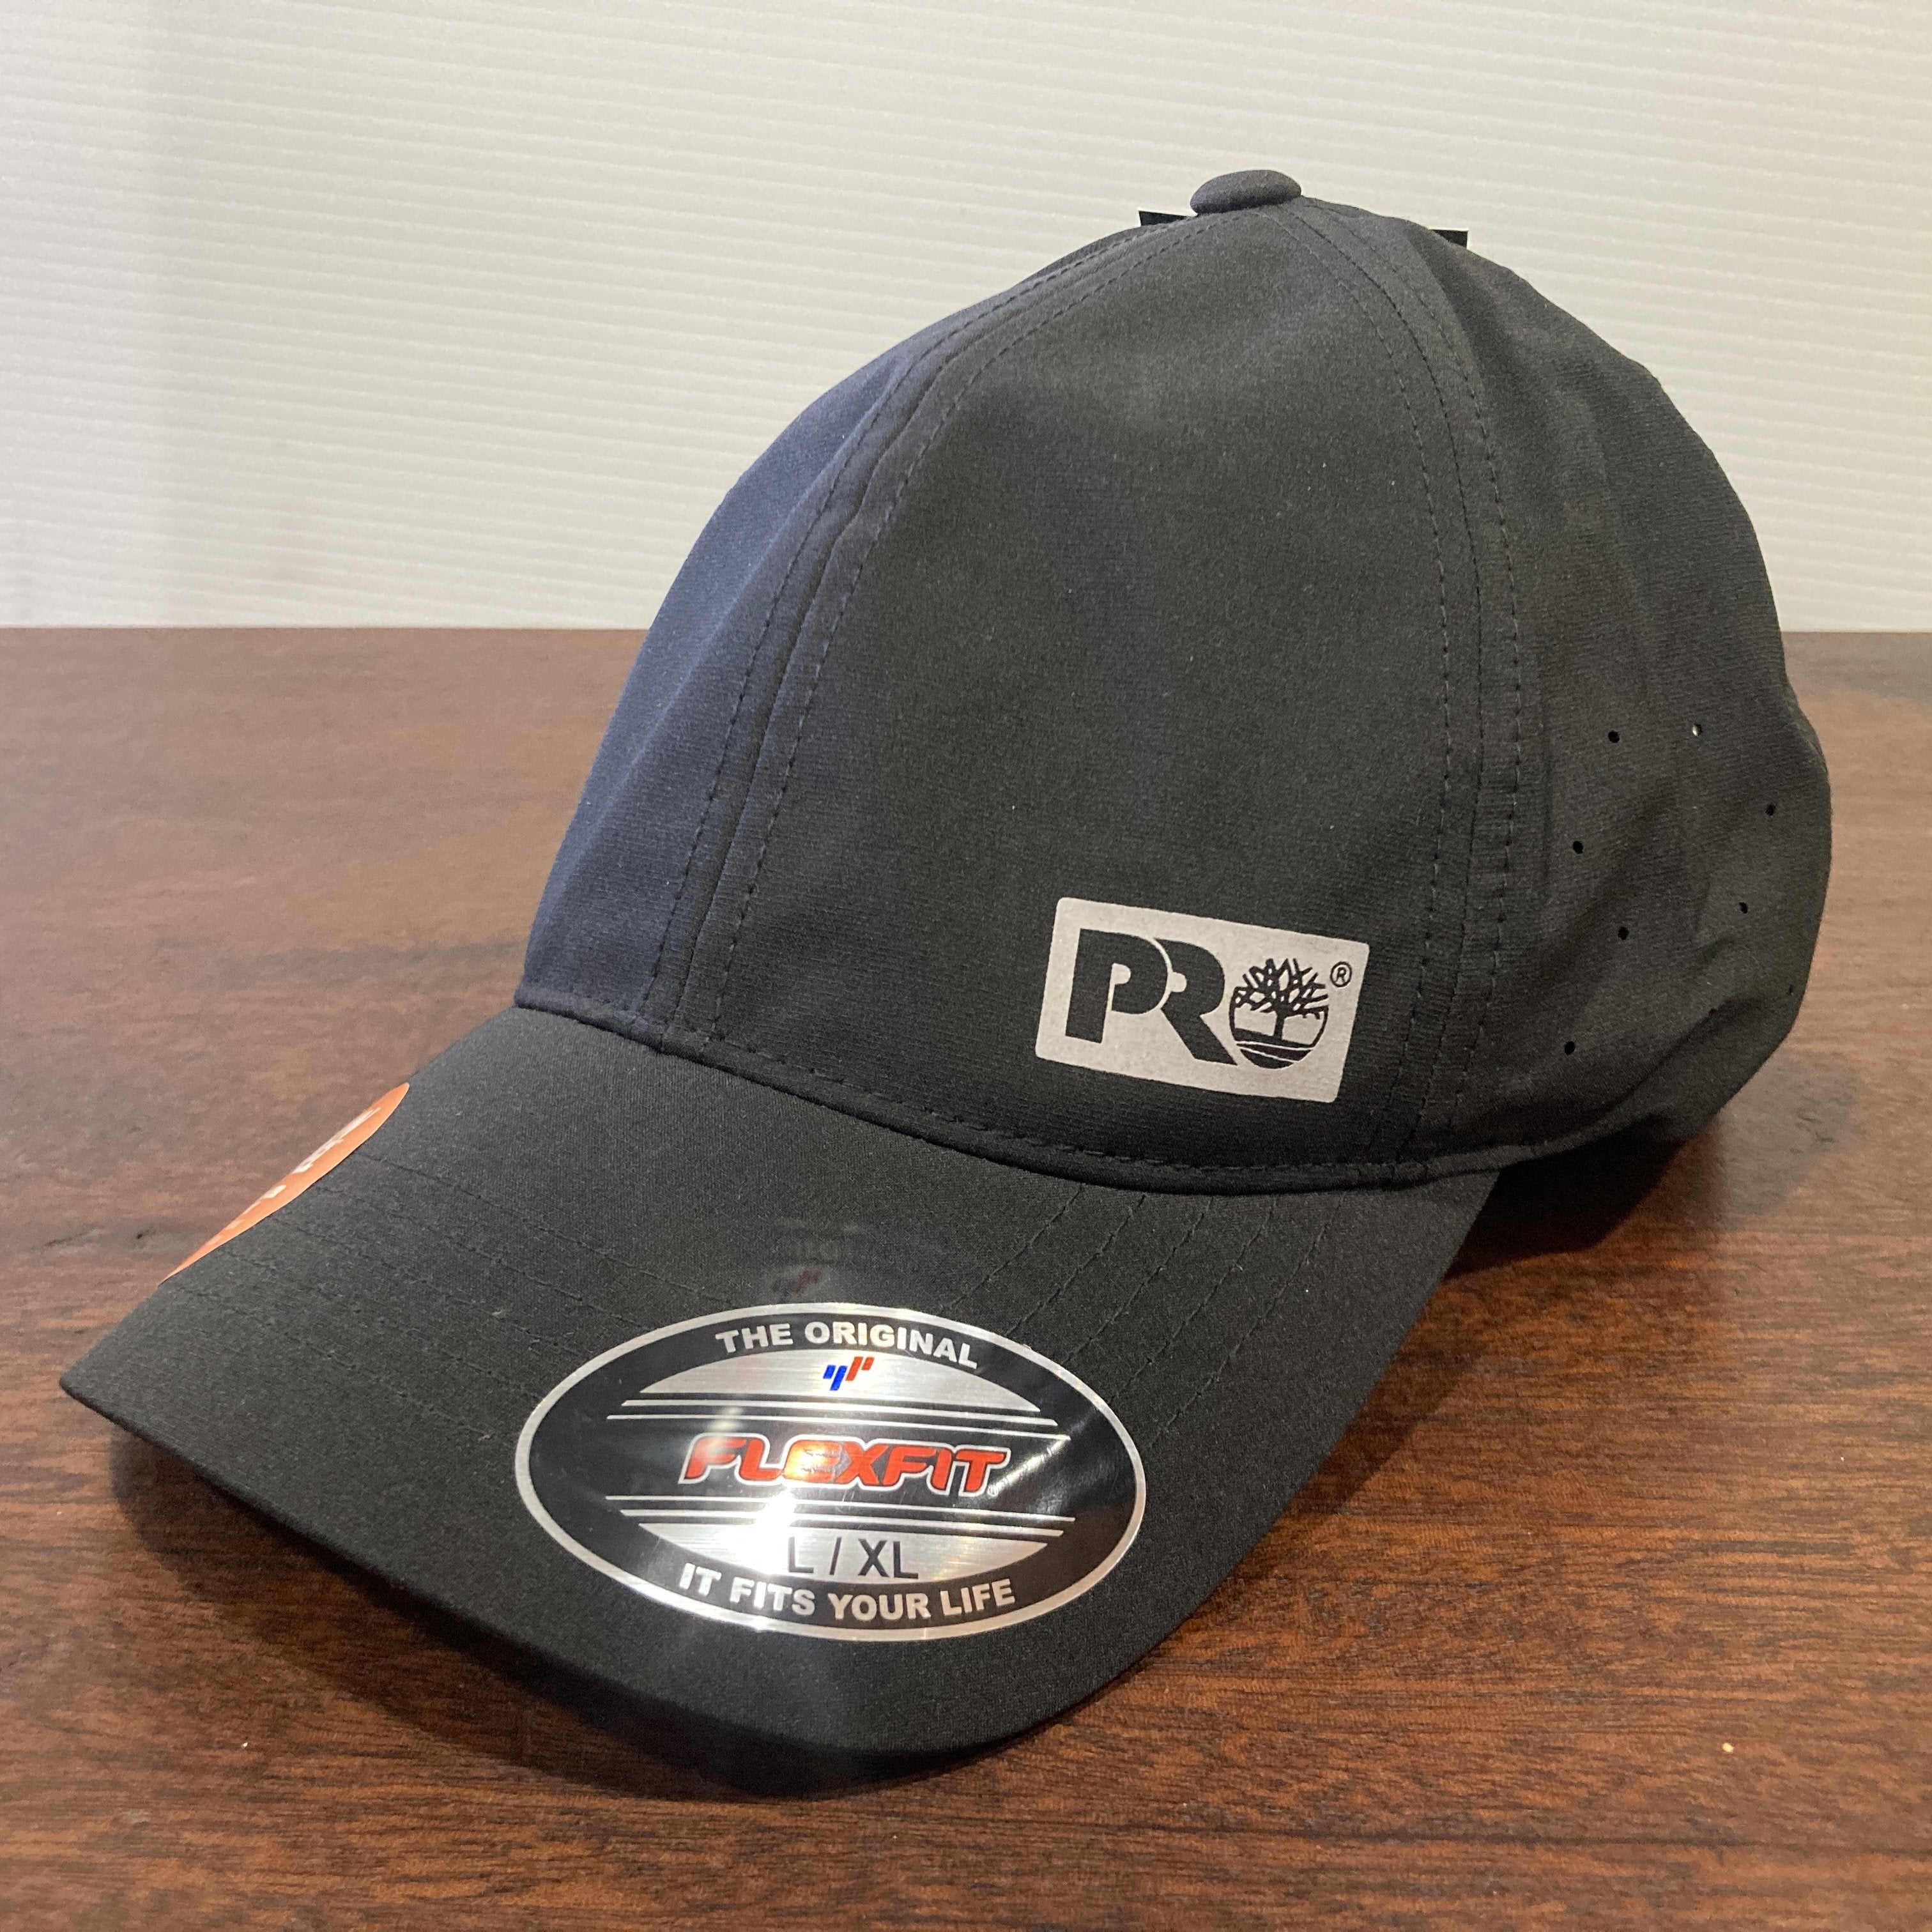 Performance Outfitters North Hat Ltd. Pro – Rose Timberland Wind